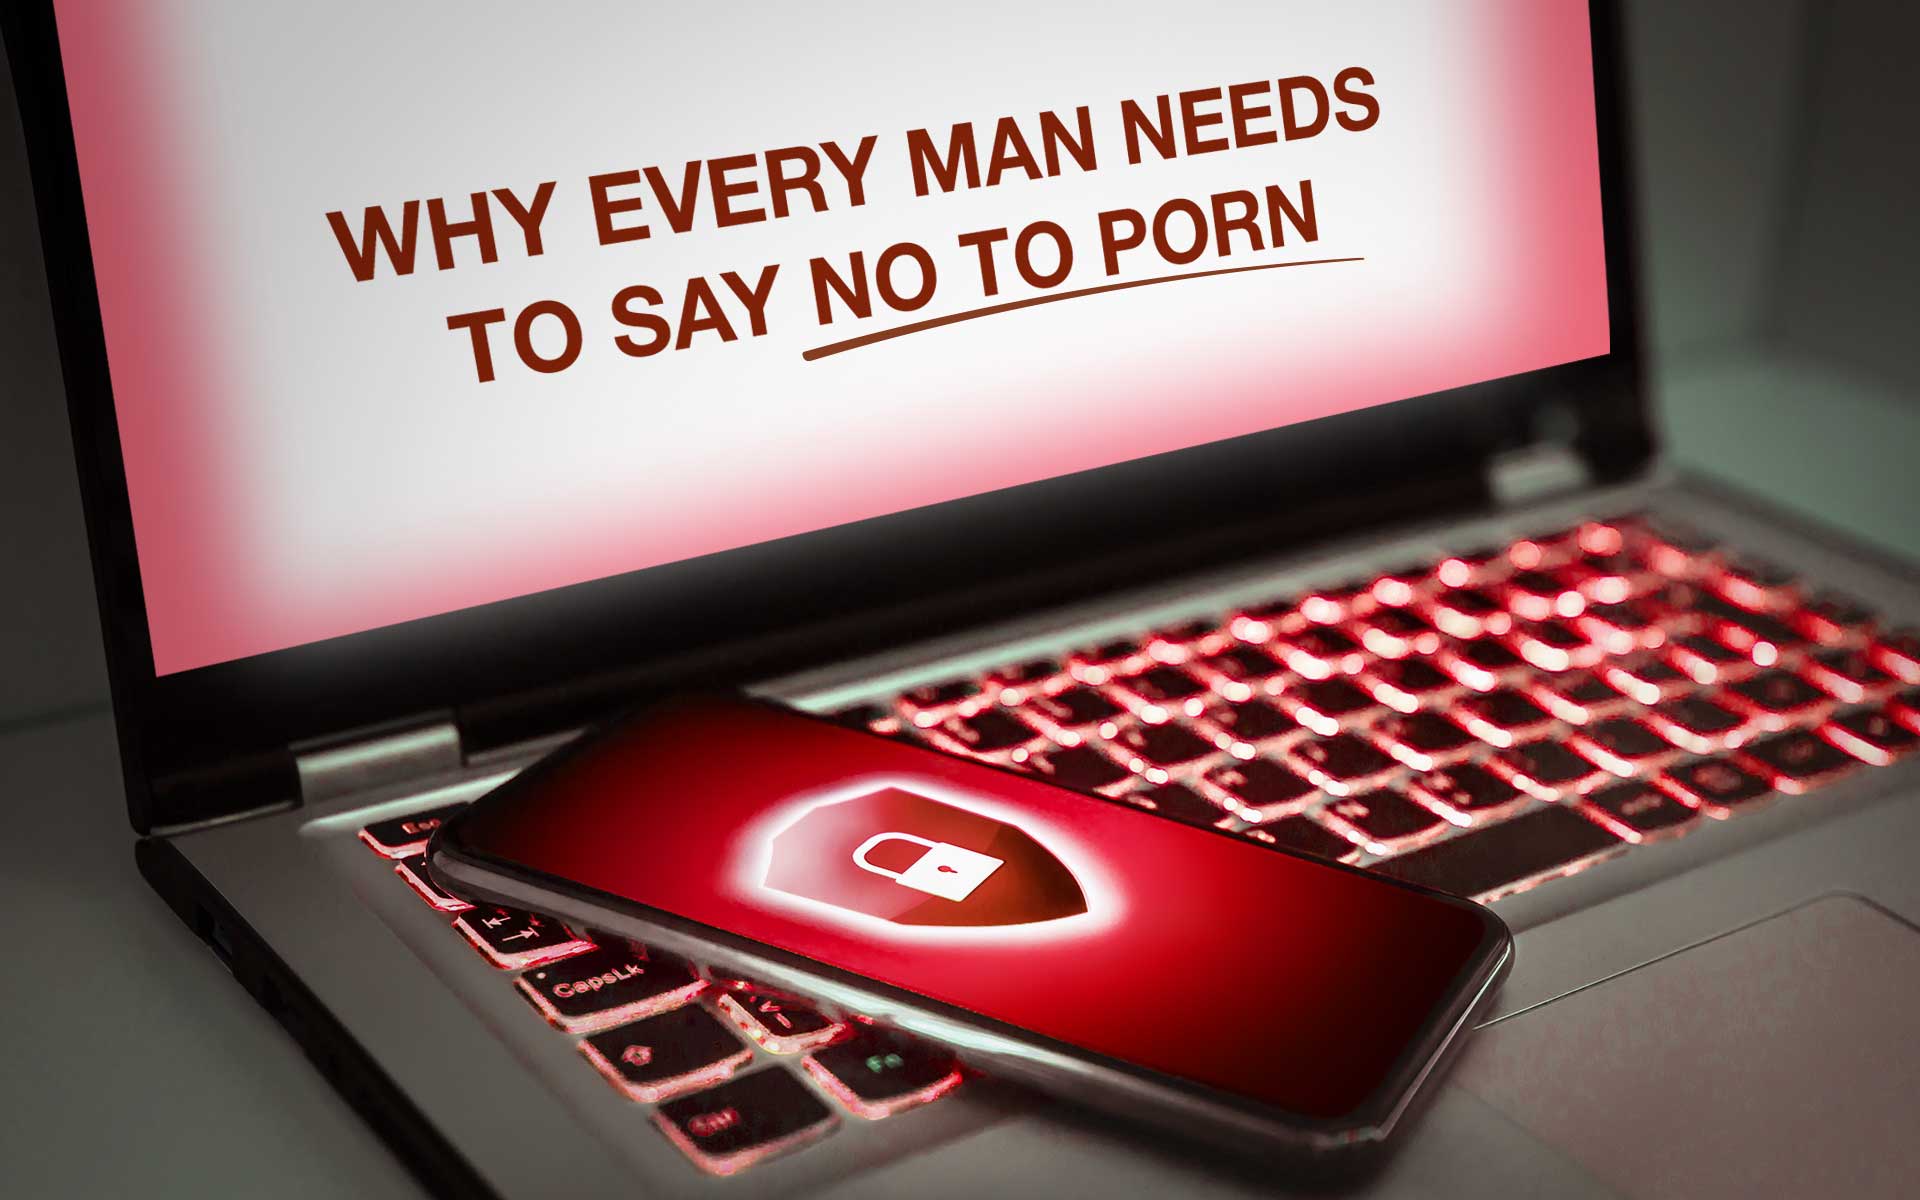 Why Every Man Needs to Say No to Porn